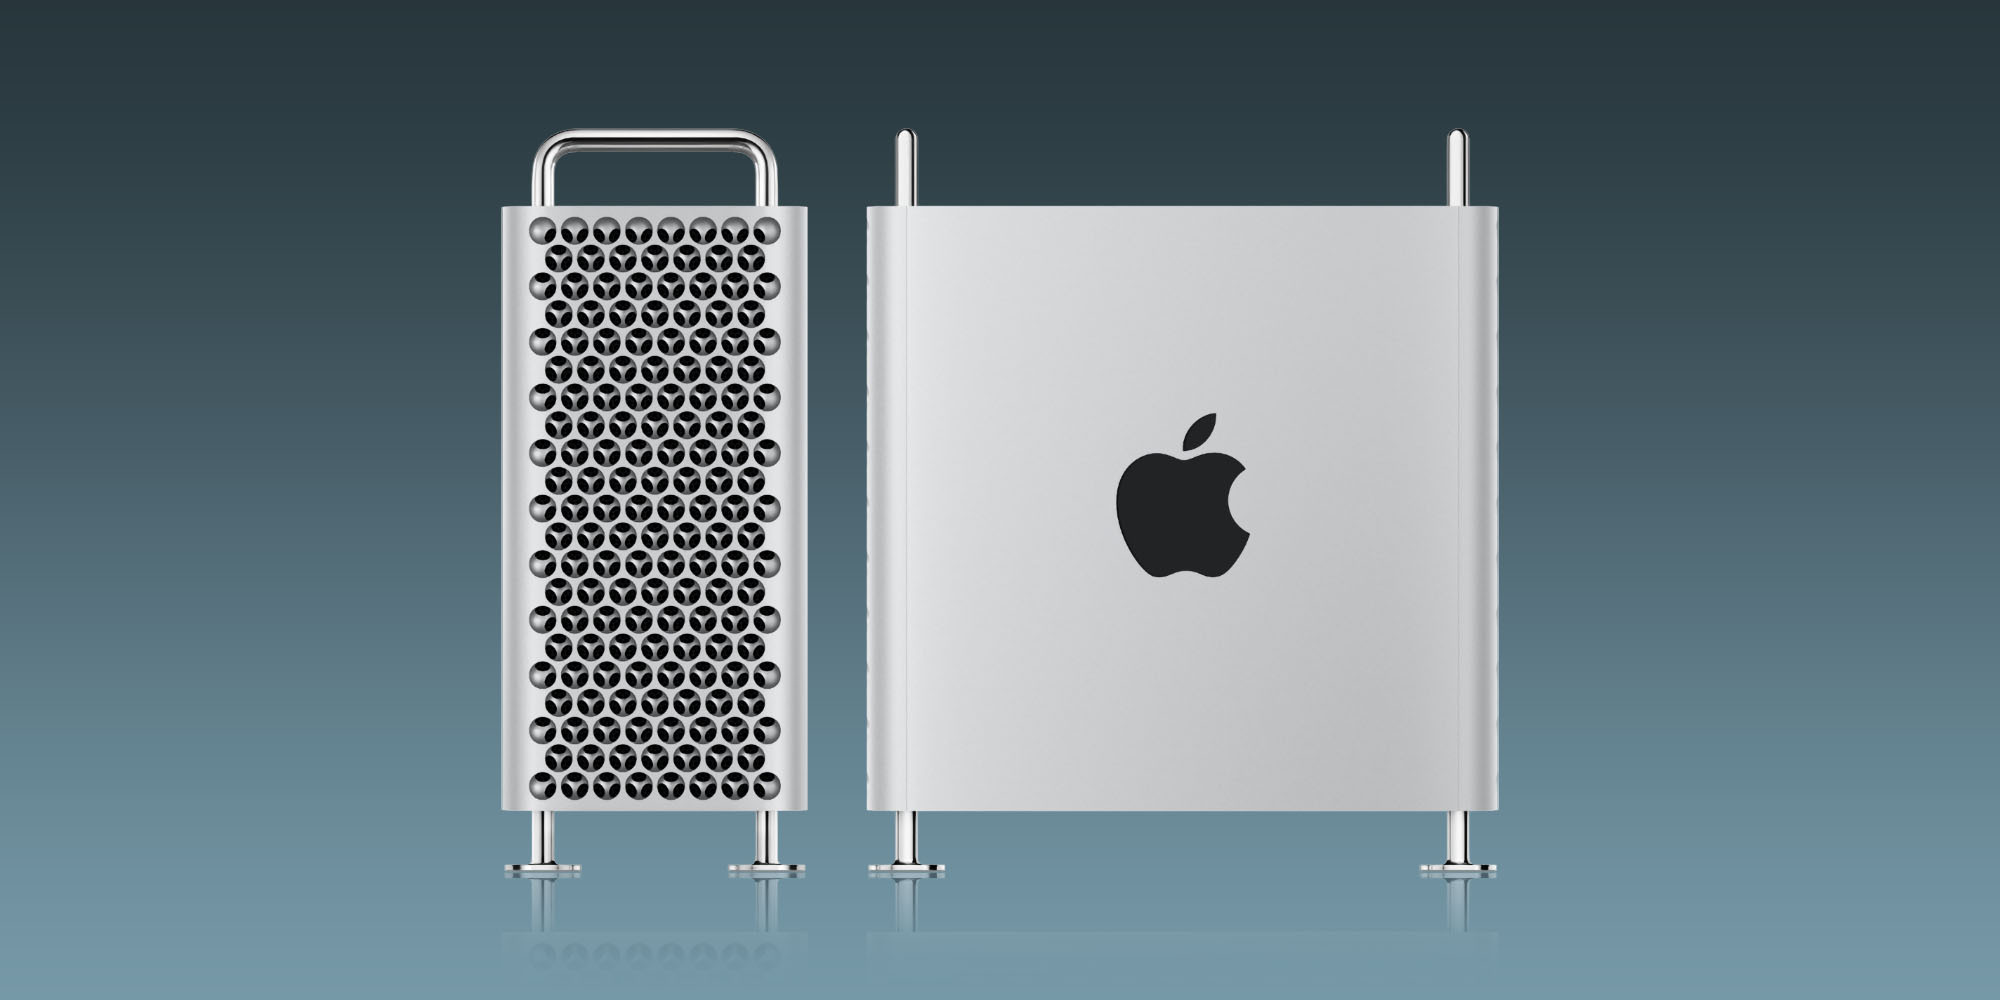 2023 Mac Pro plan would be understandable, but still worrying